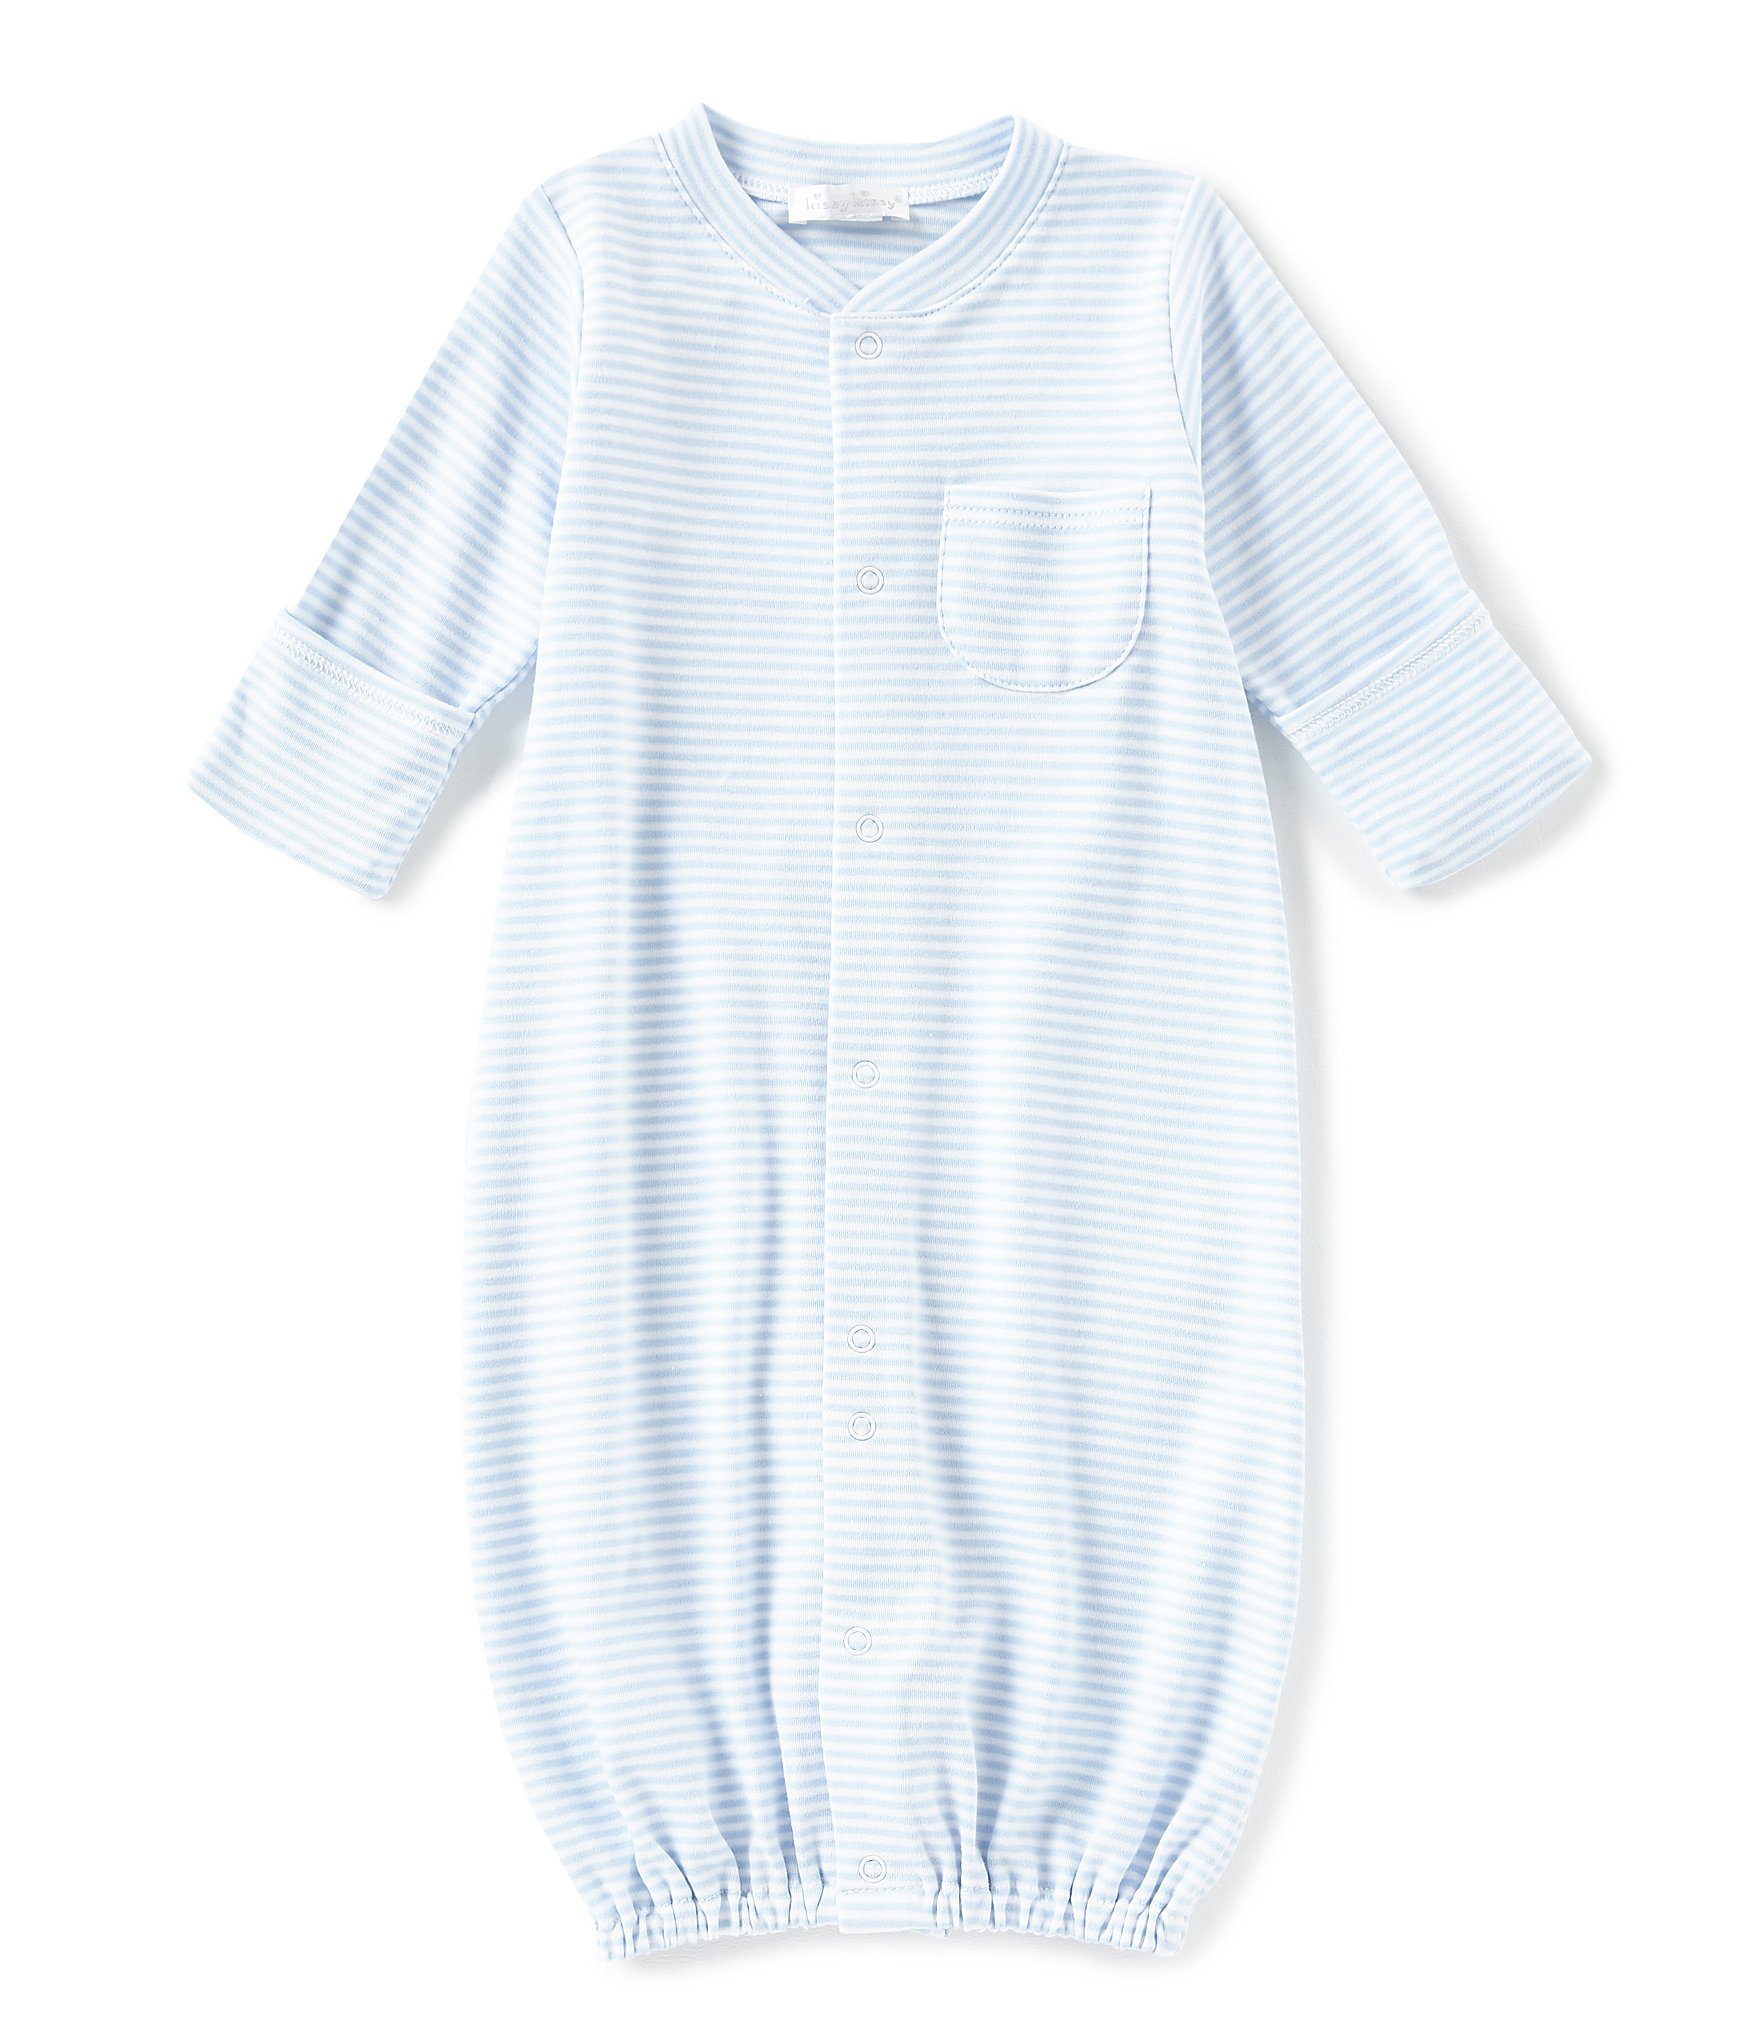 nightgowns for newborn babies